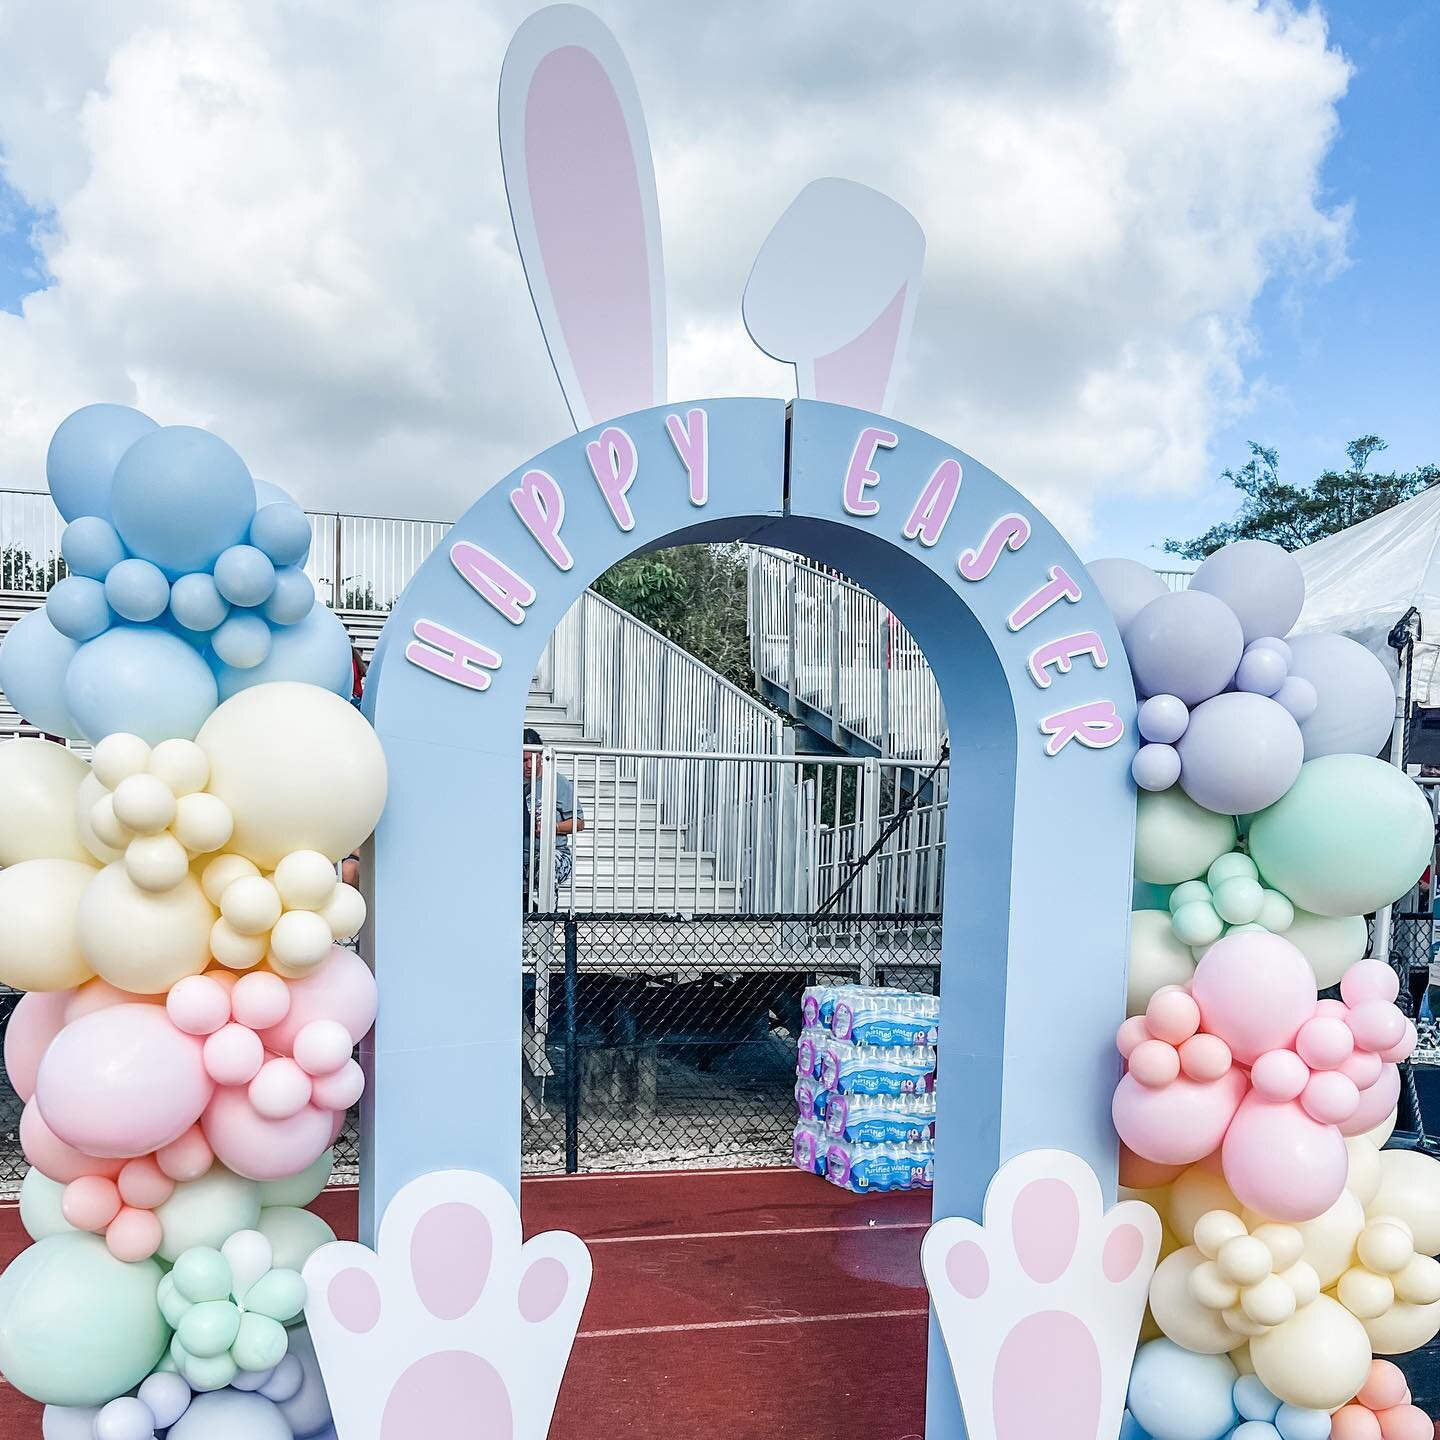 Egg drop yesterday with @wearecoolchurch 😎 Happy easter! 

Rental by @southfloridabackdrops 
Balloons @balloonworldevents 
.
.
.
#easterballoons #miramarballoons #southfloridaballoons #miamiballoons #browardballoons #parklandballoons #bocaballoons